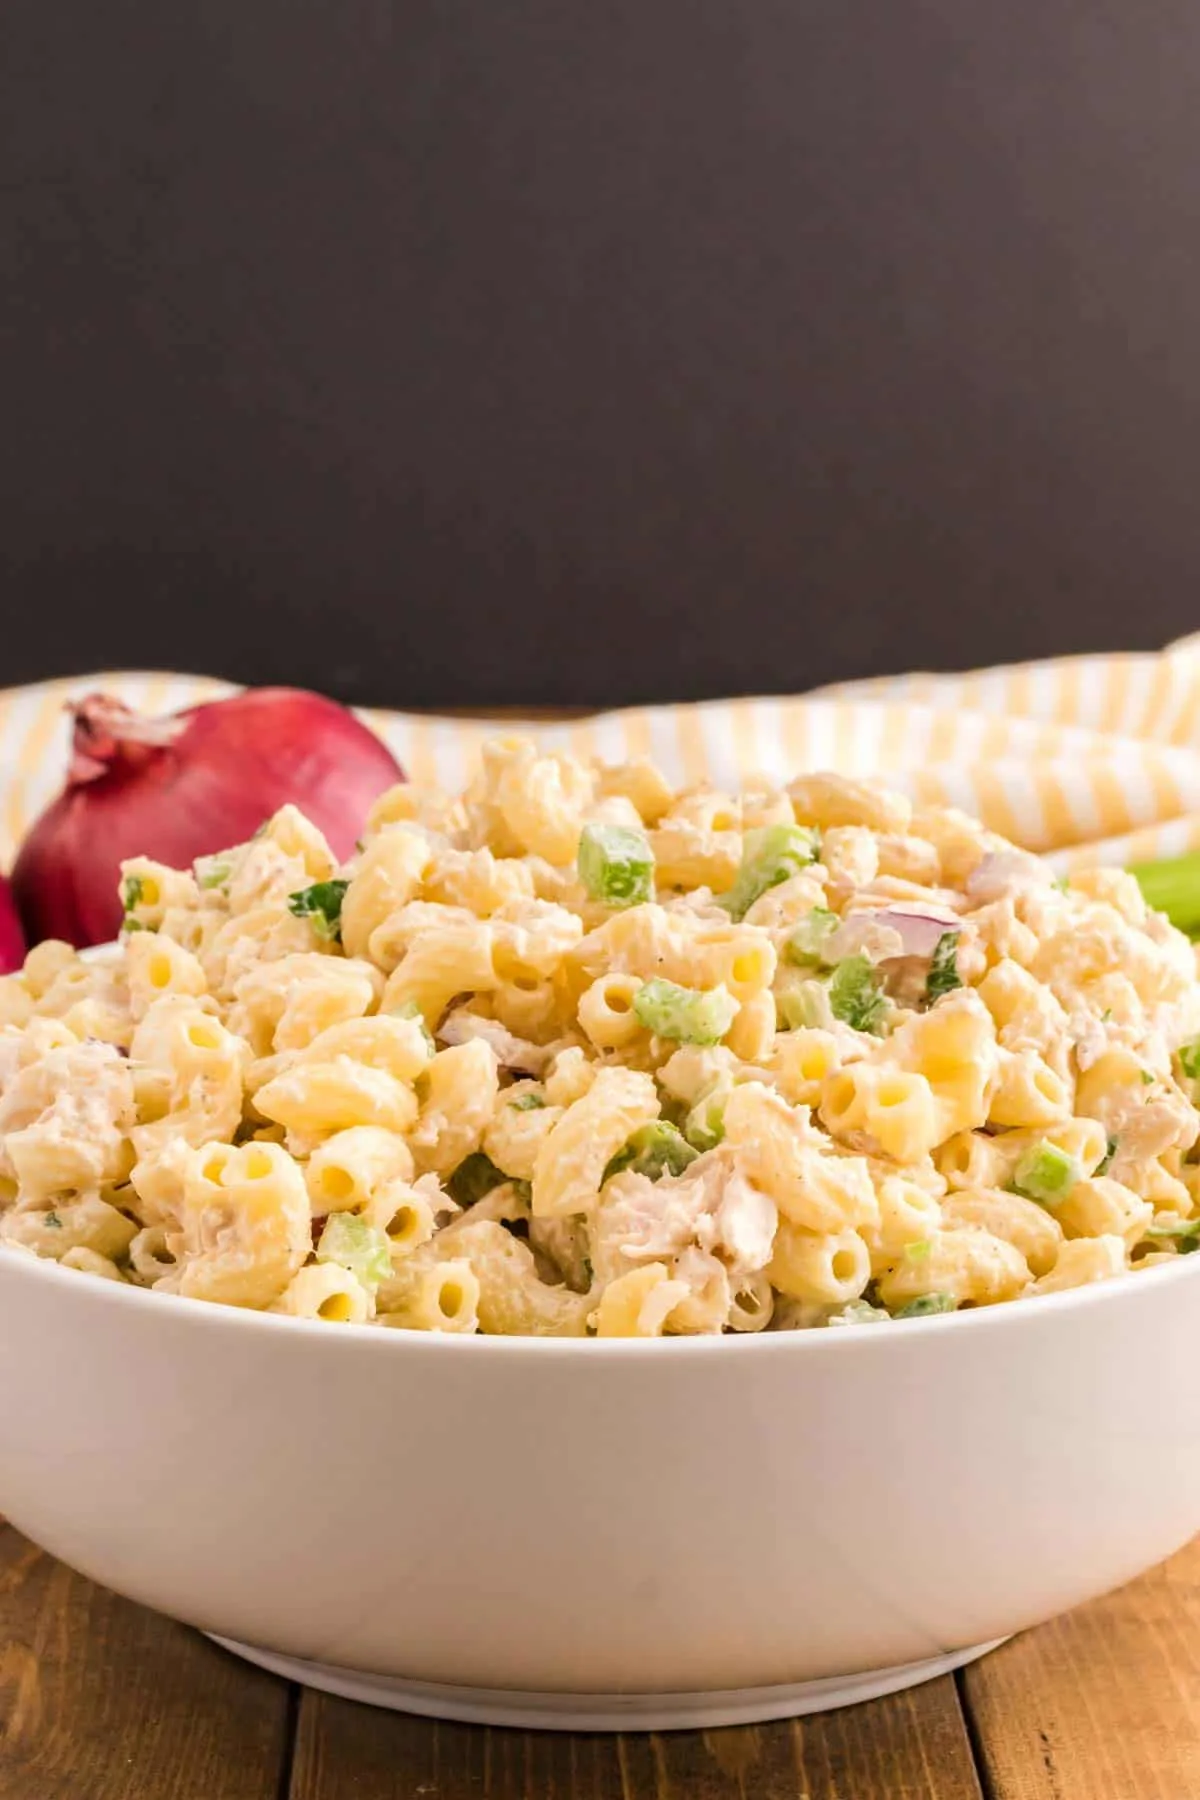 Tuna Macaroni Salad is a classic pasta salad recipe loaded with canned tuna, chopped celery, diced red onions and green peppers all tossed in a seasoned mayo dressing.